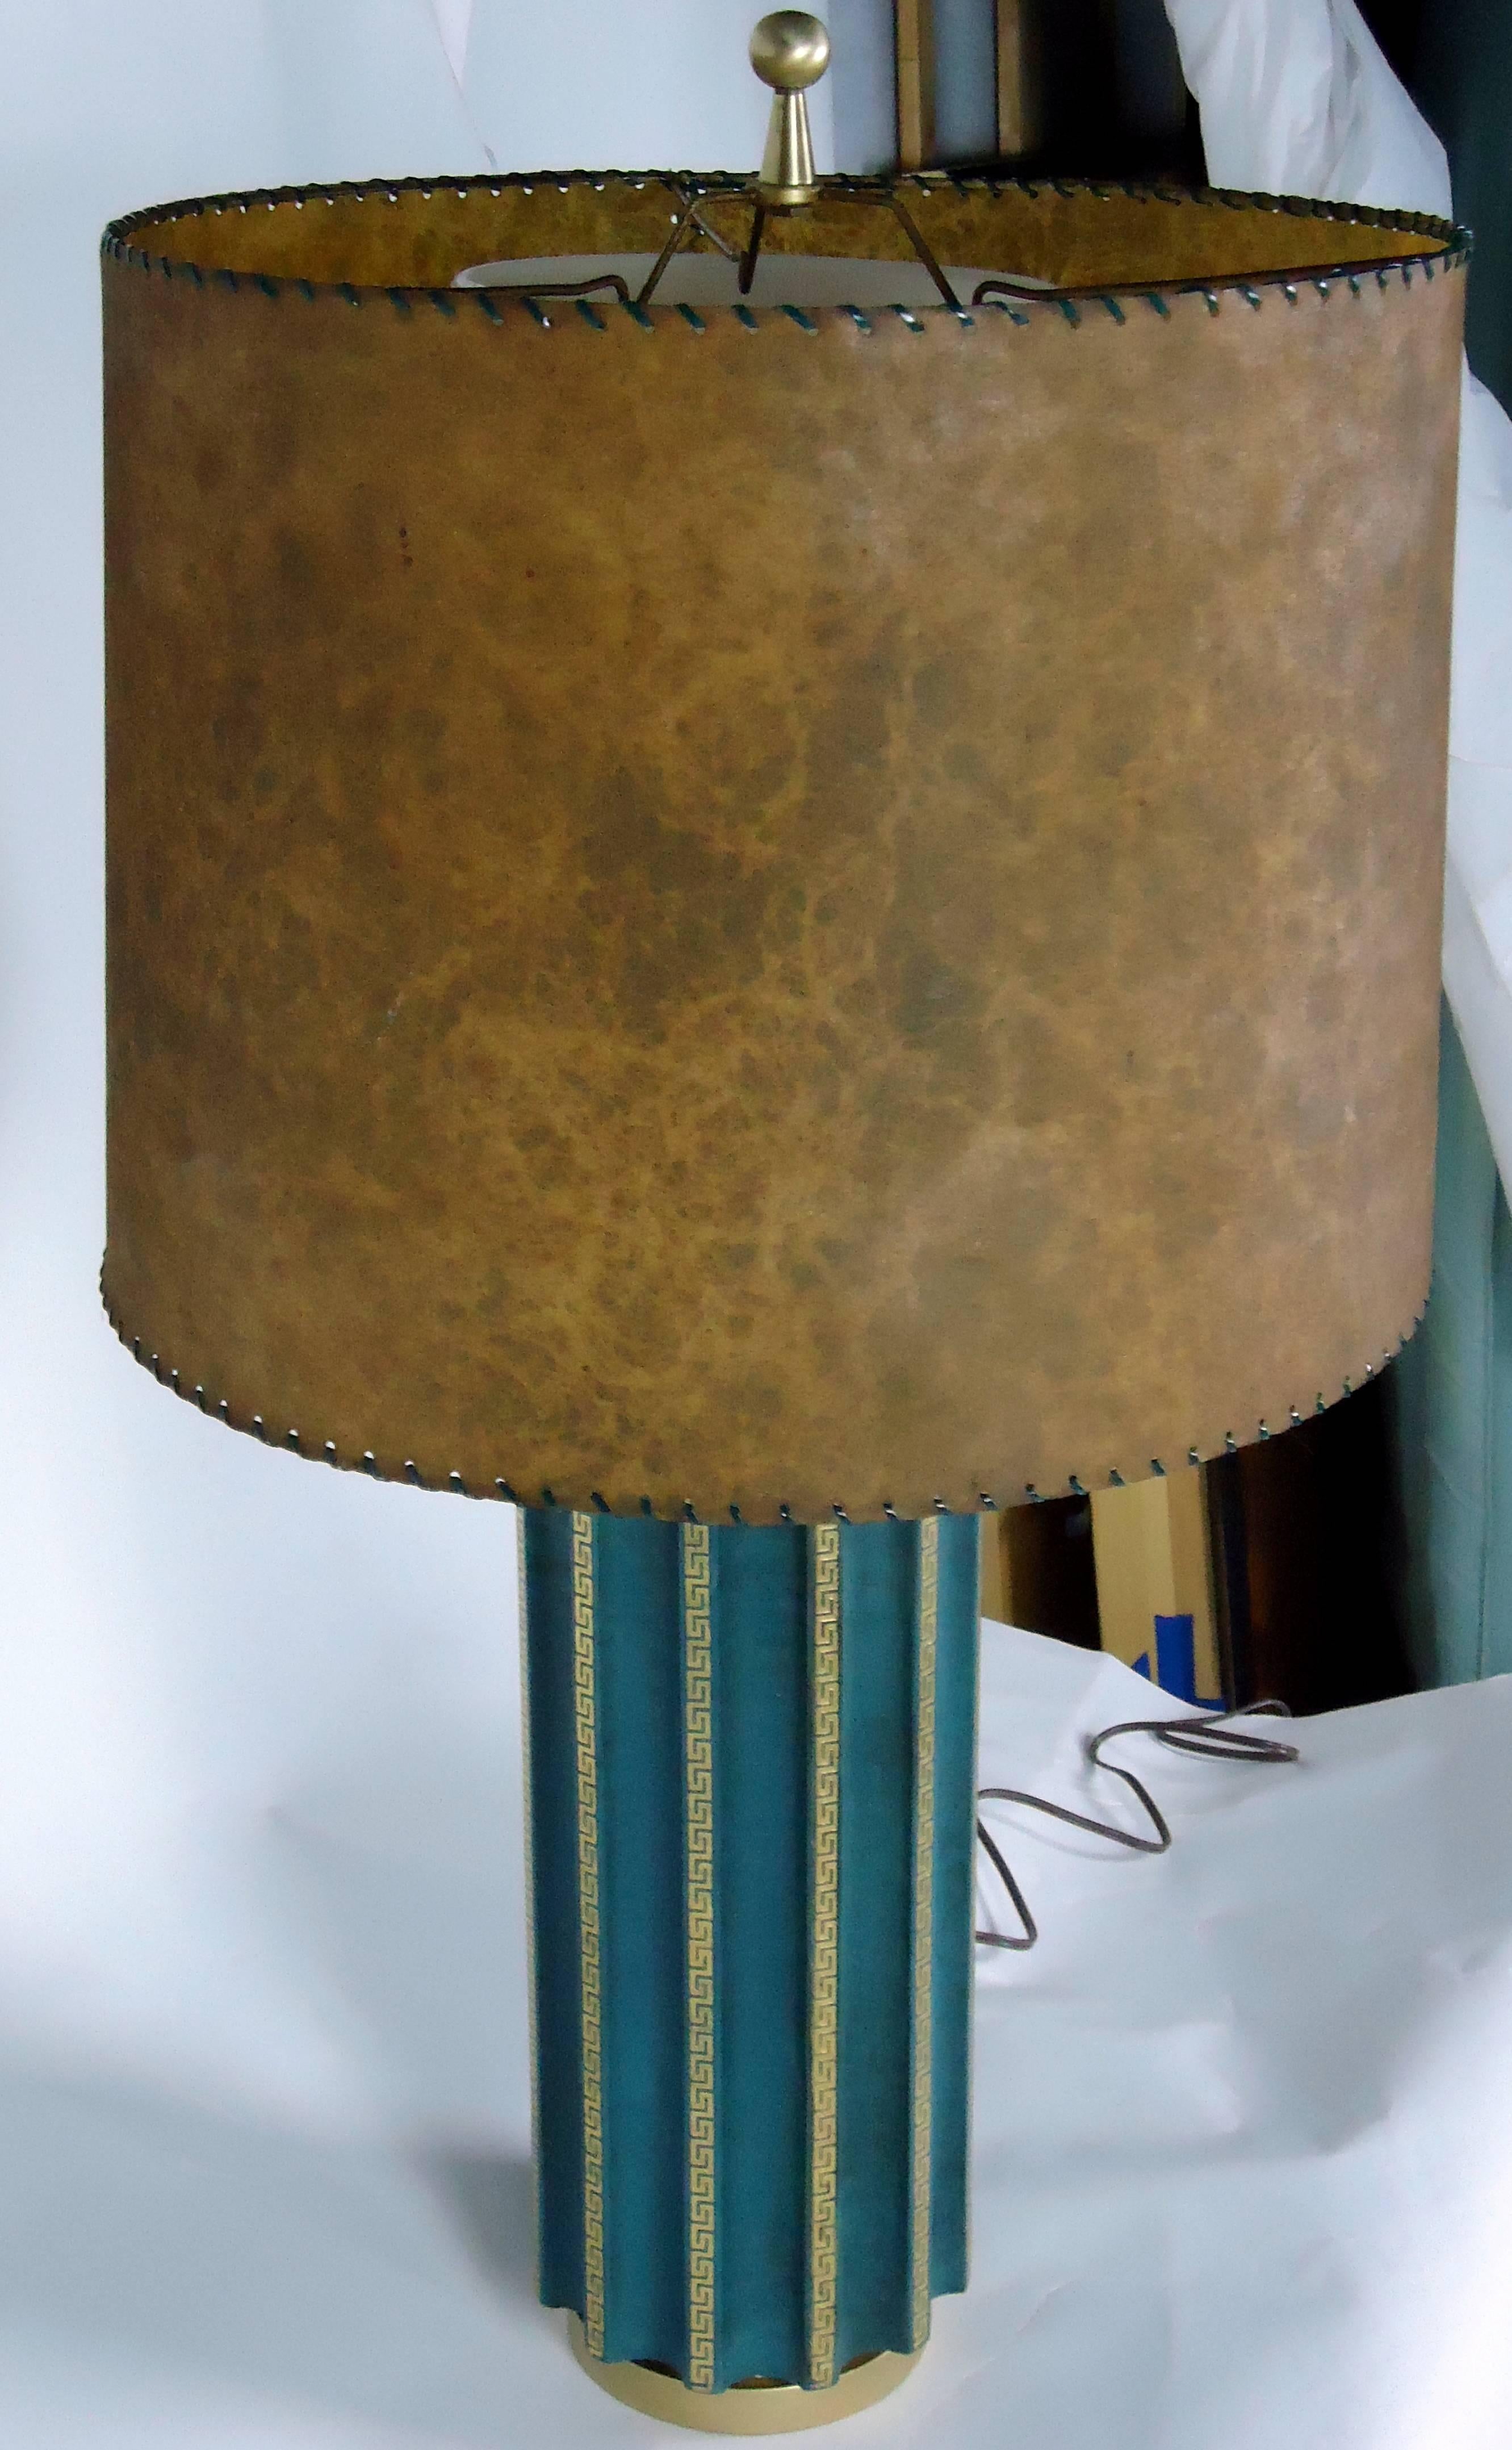 Neoclassical Teal Green Fluted Leather Cased Table Lamp in the Style of Tommi Parzinger 1950s For Sale